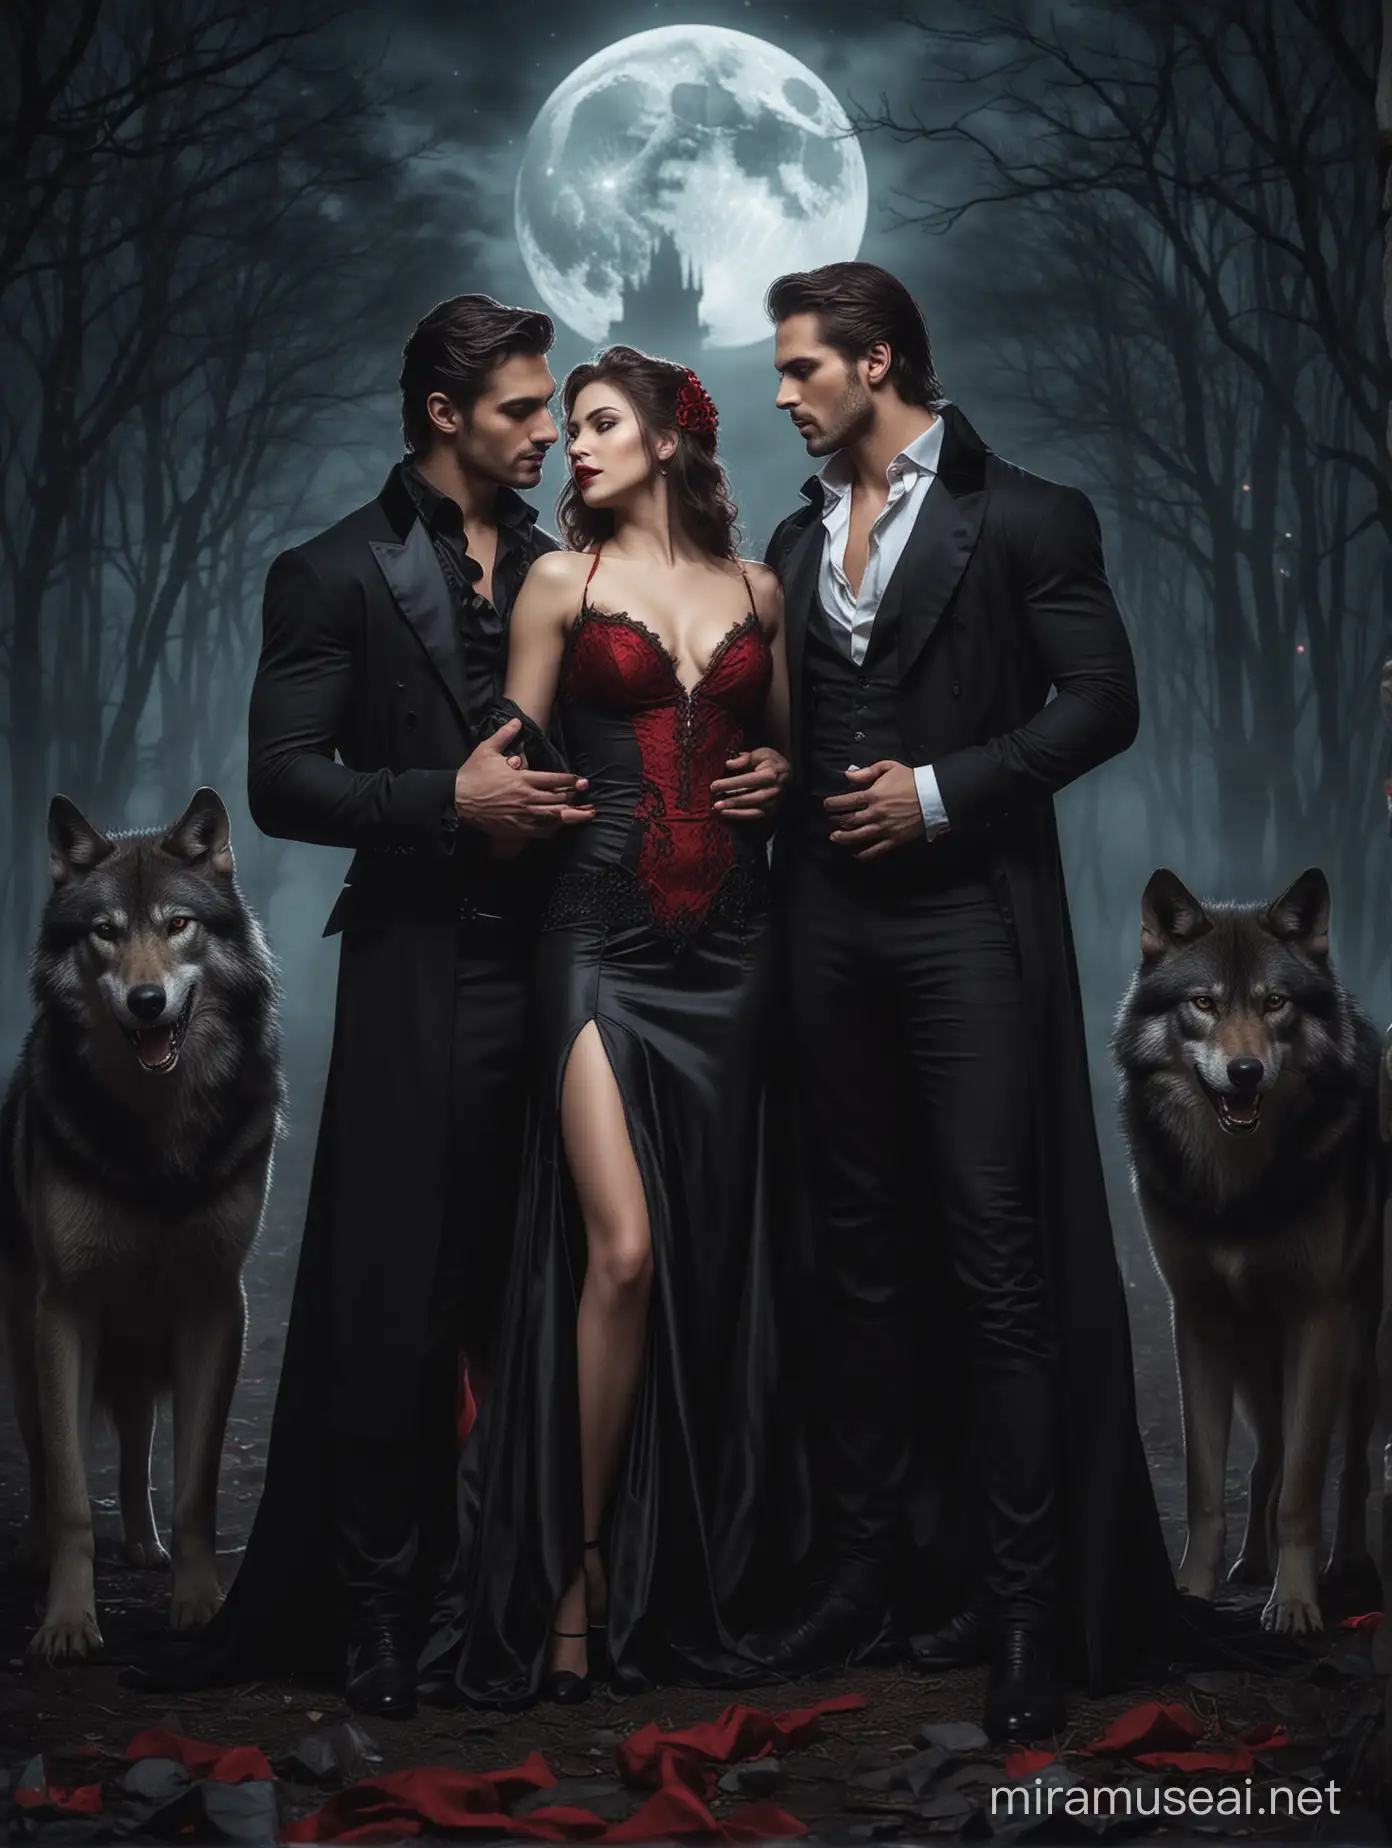 Romantic Men and Lady with Wolves and Vampires in Moonlight